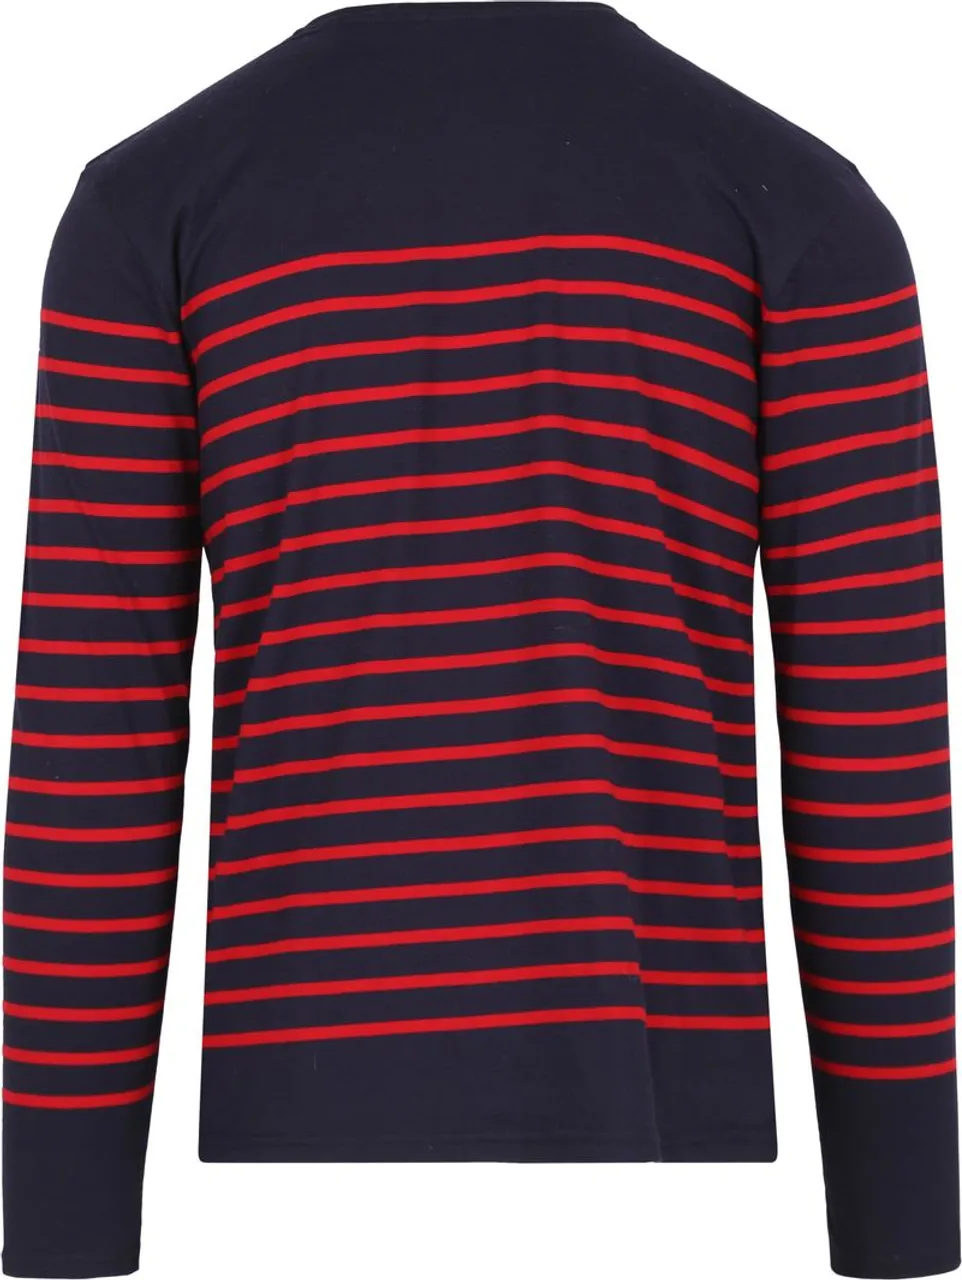 Armor-Lux Port-Louis T-Shirt Strepen Donkerblauw Rood